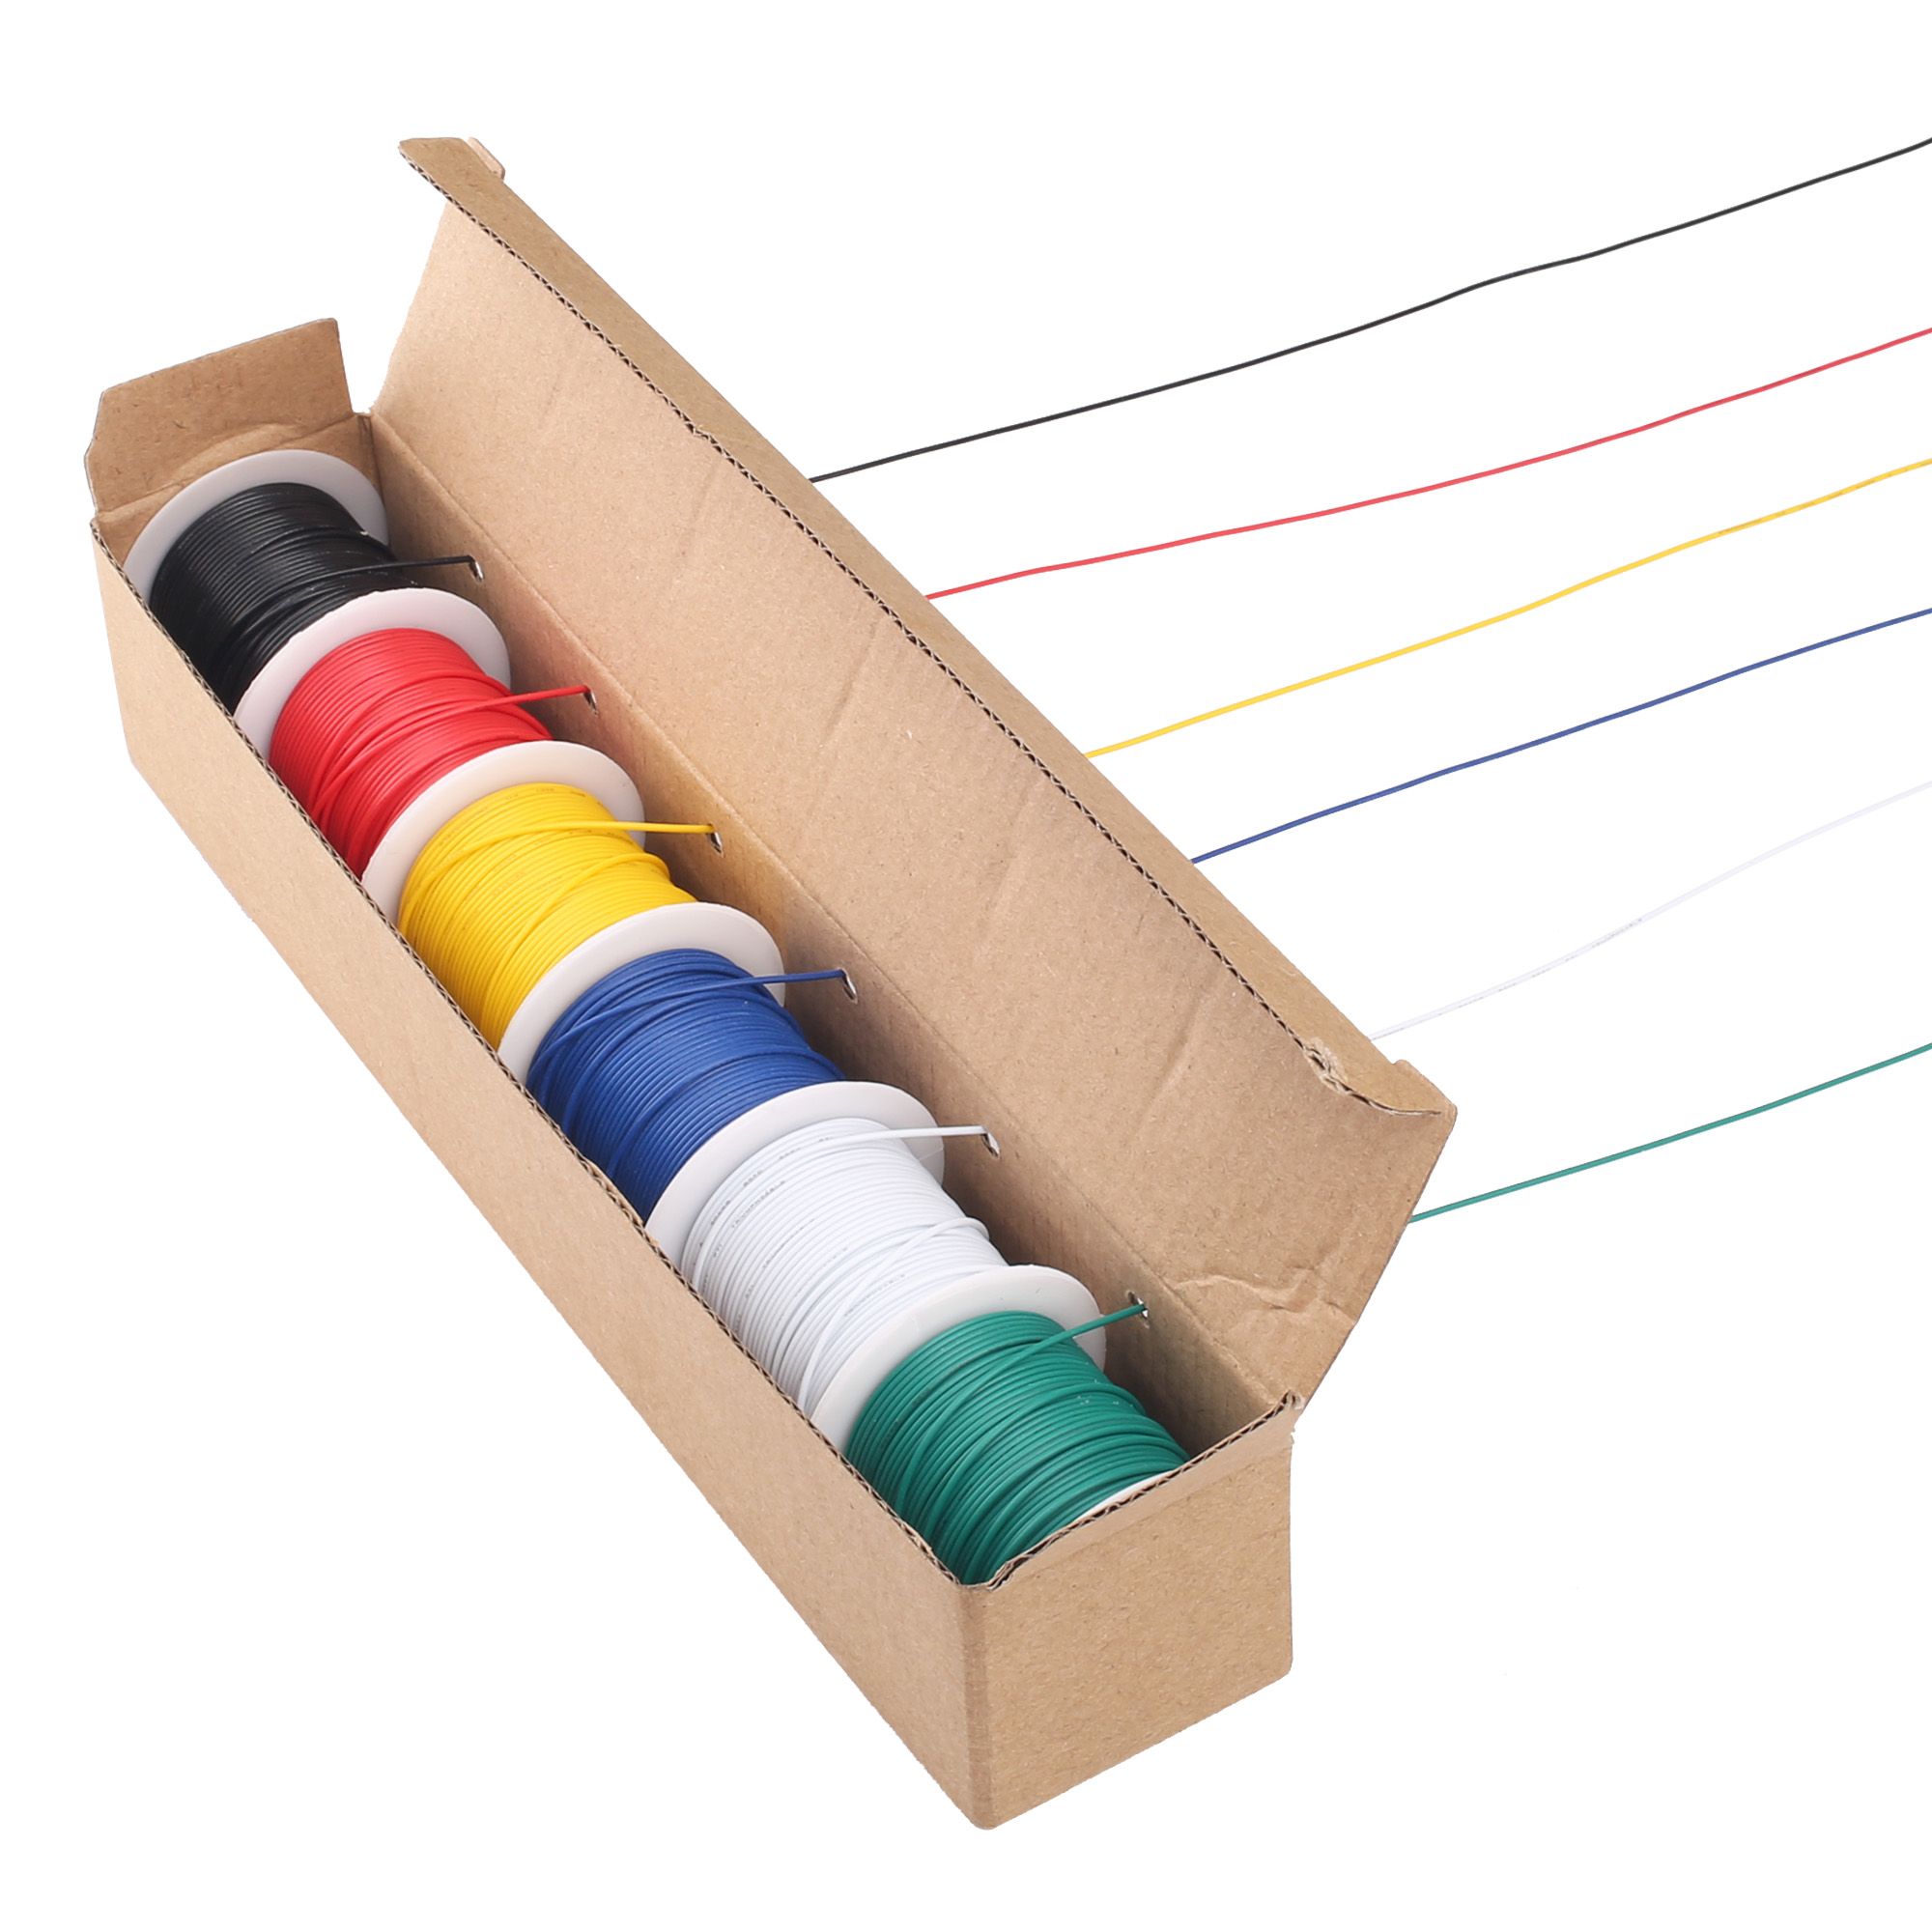 LotFancy 30AWG Stranded Wire, 6 Colors (30 feet/9 m Each) Electrical Wire, UL Listed - image 5 of 8